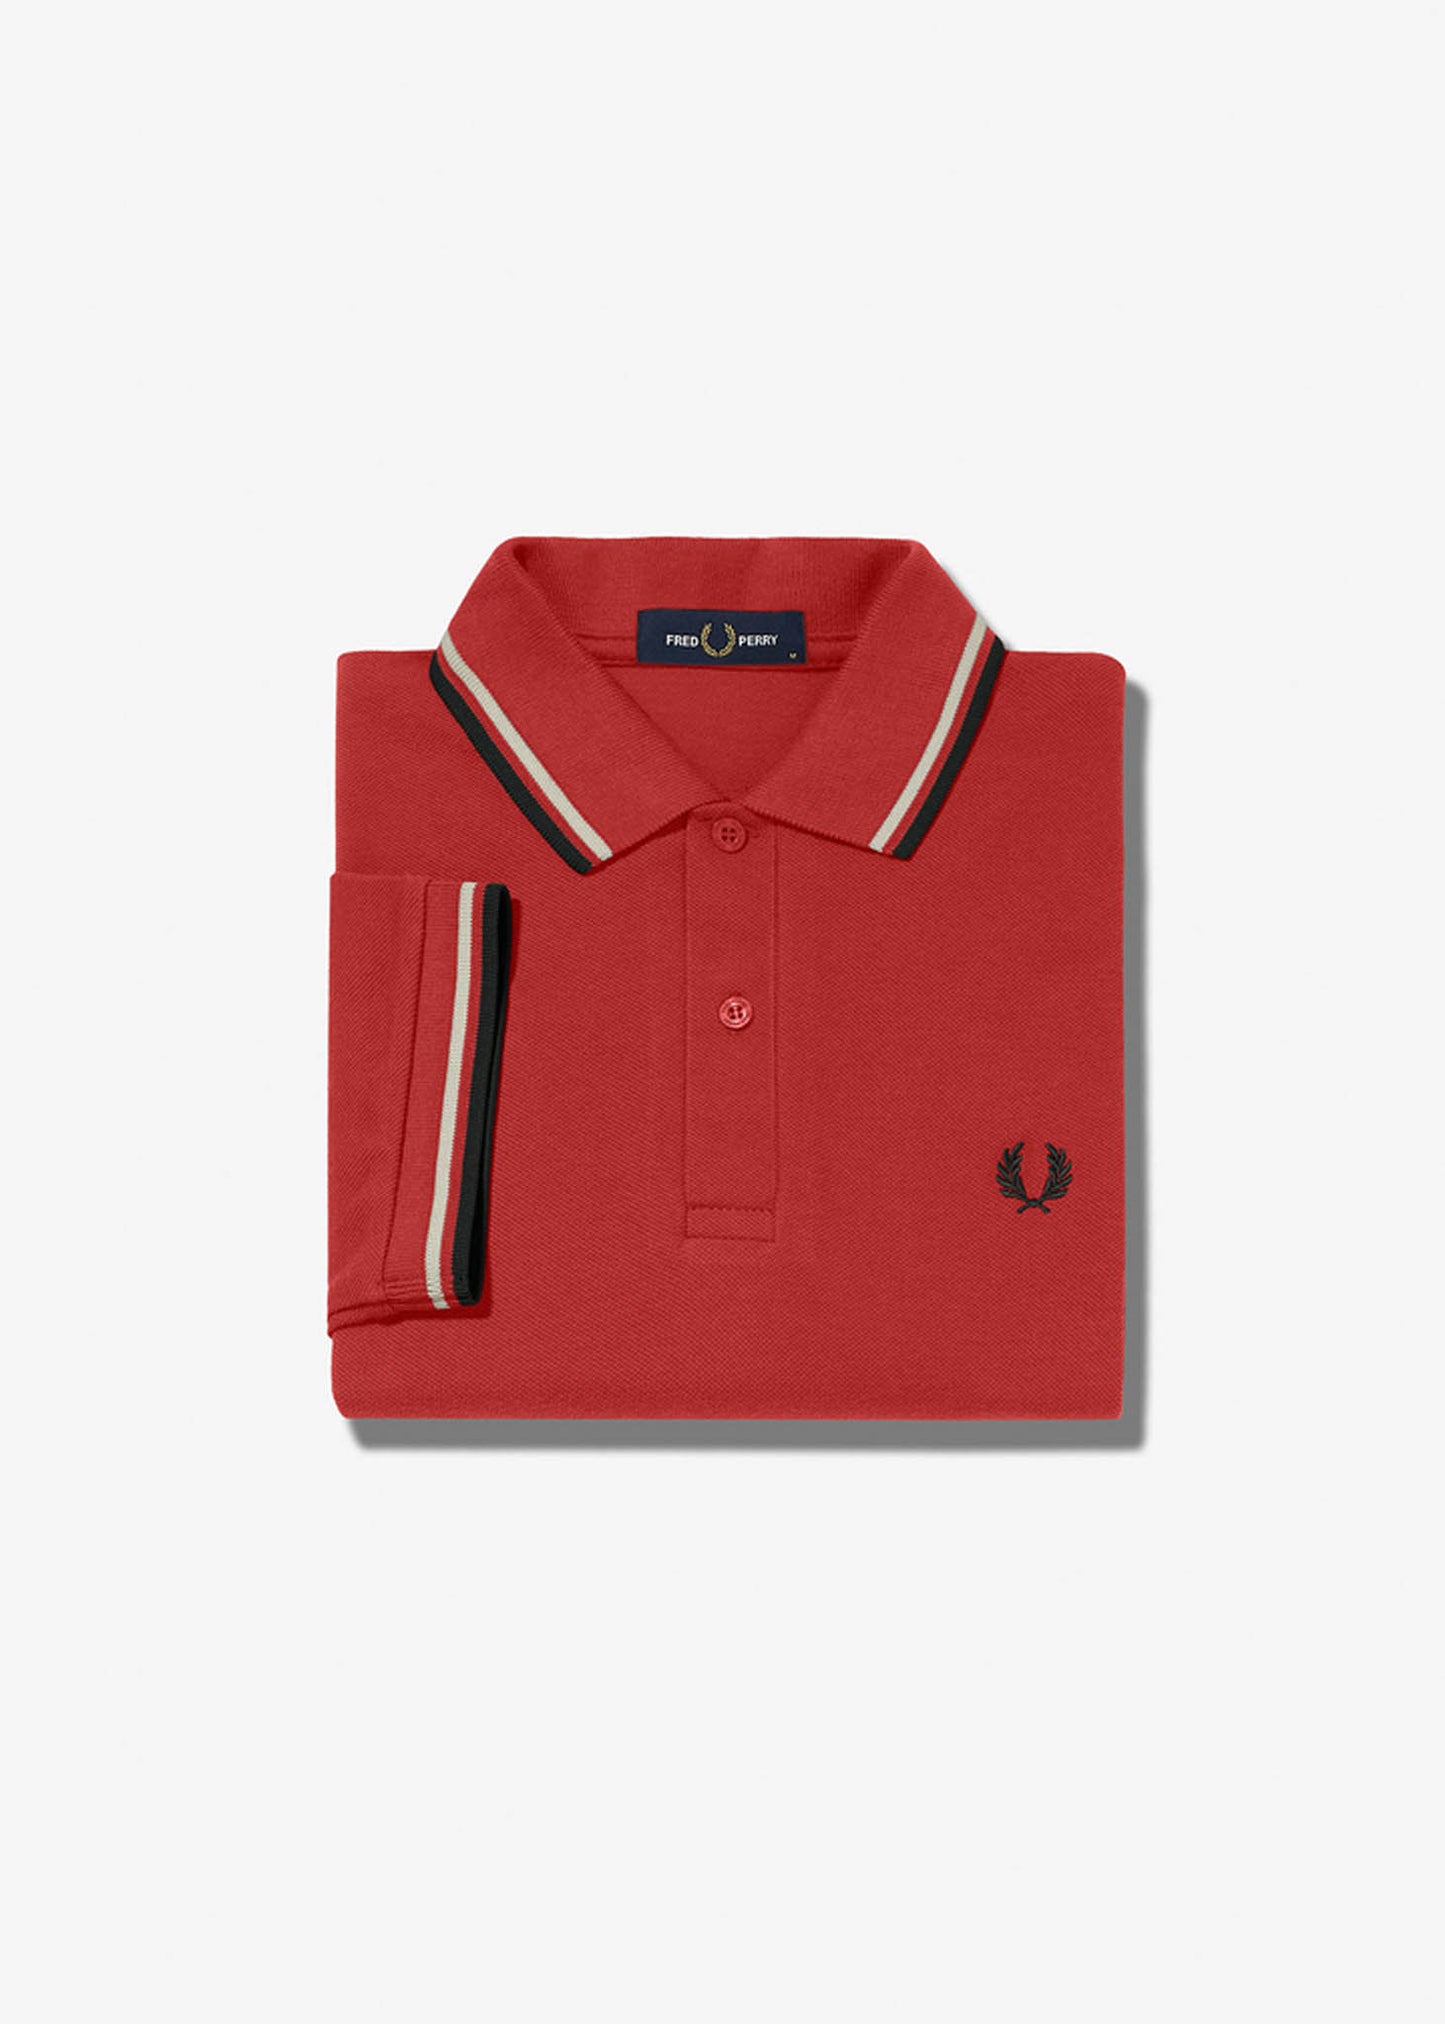 Twin tipped fred perry shirt - washed red snow white black